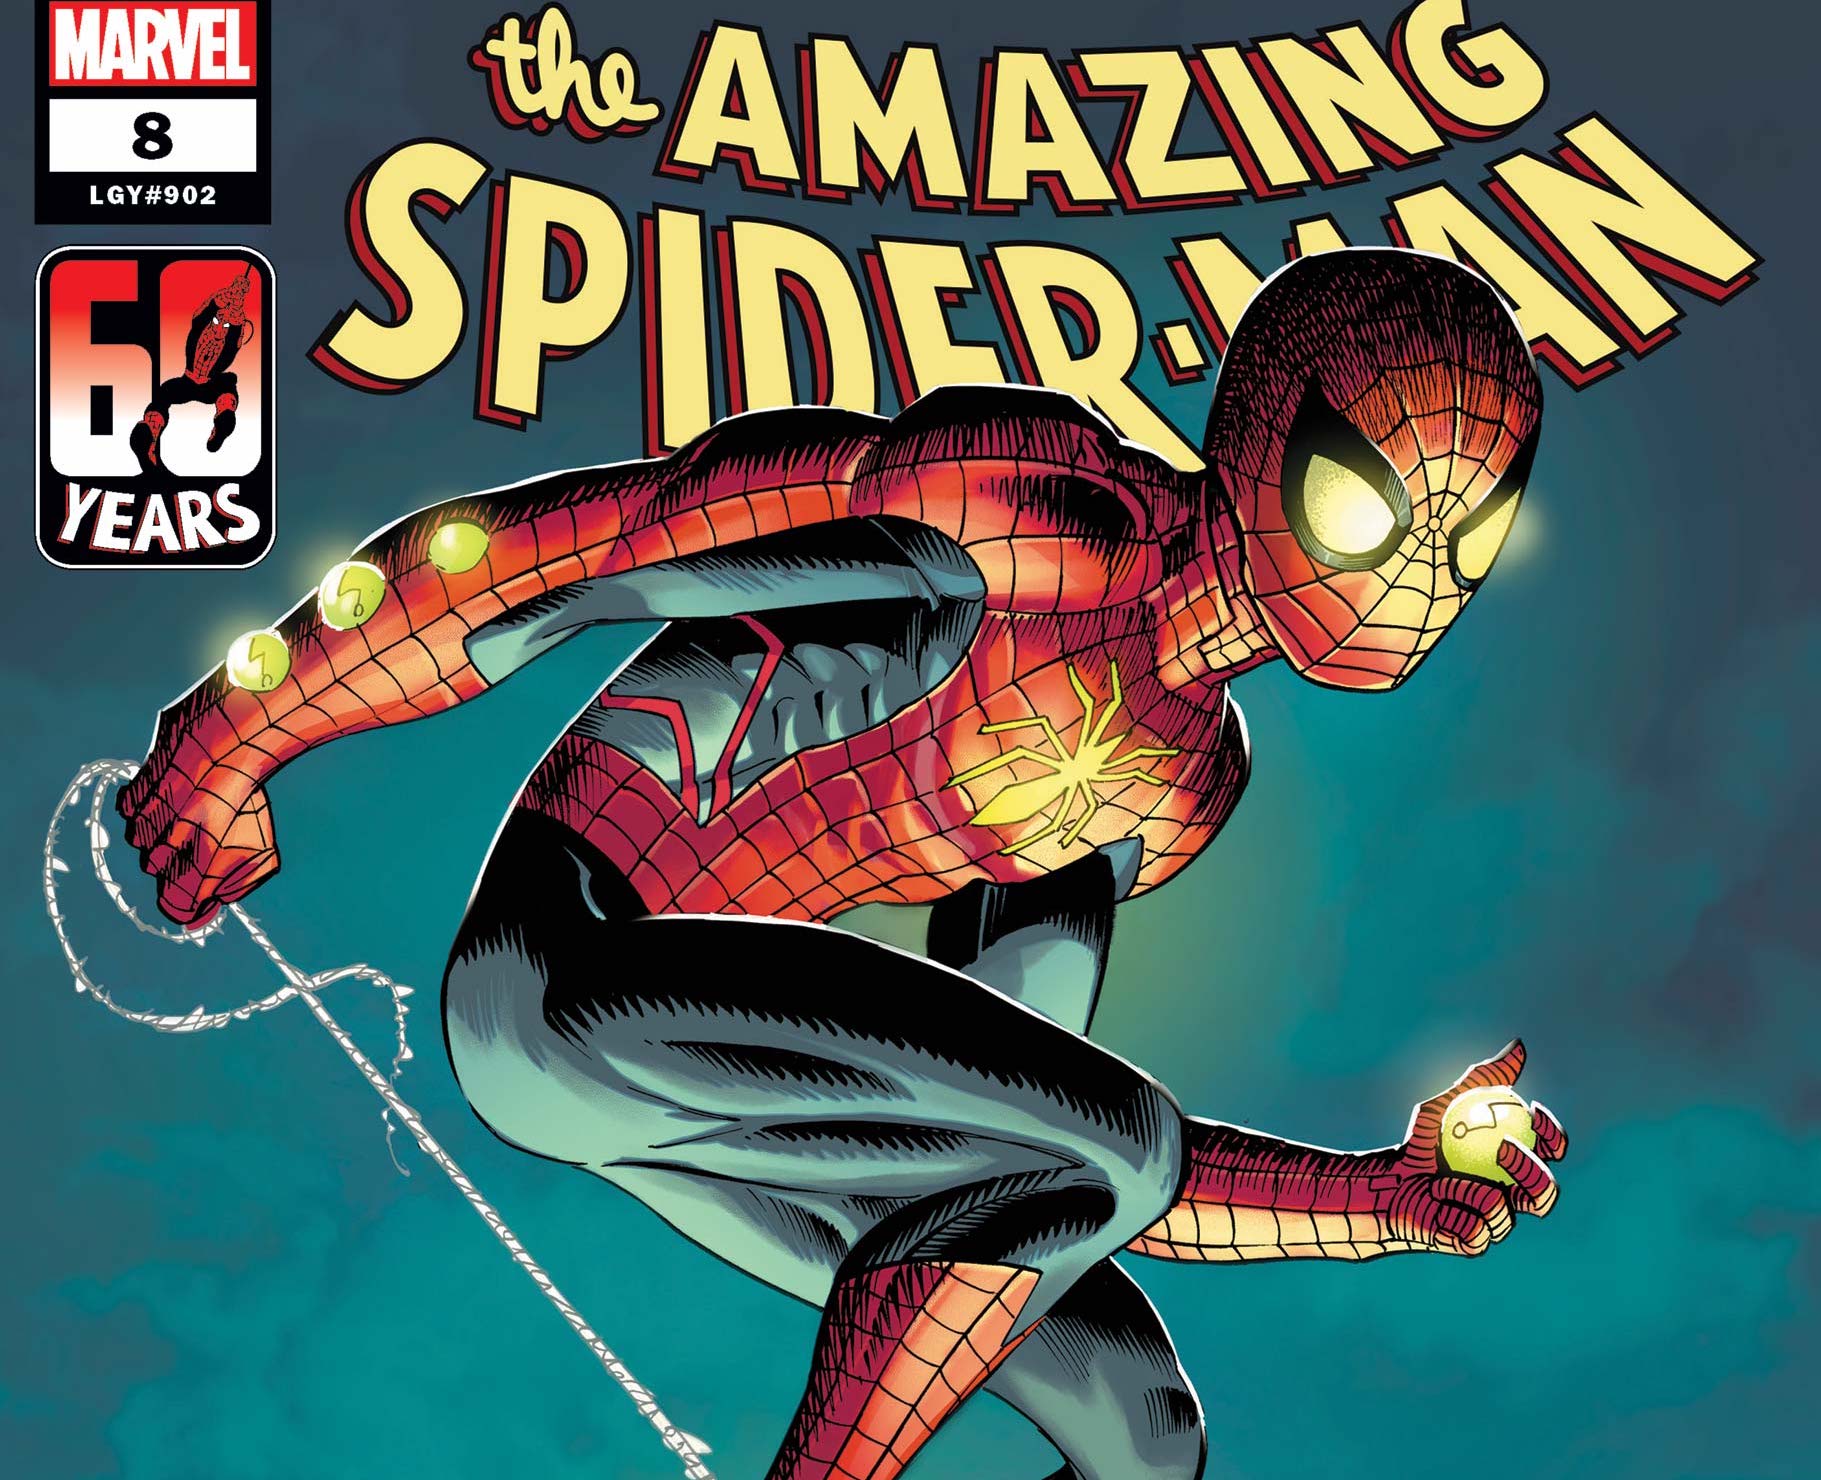 ‘Amazing Spider-Man’ #8 (LGY #902) features a great fight with Vulture